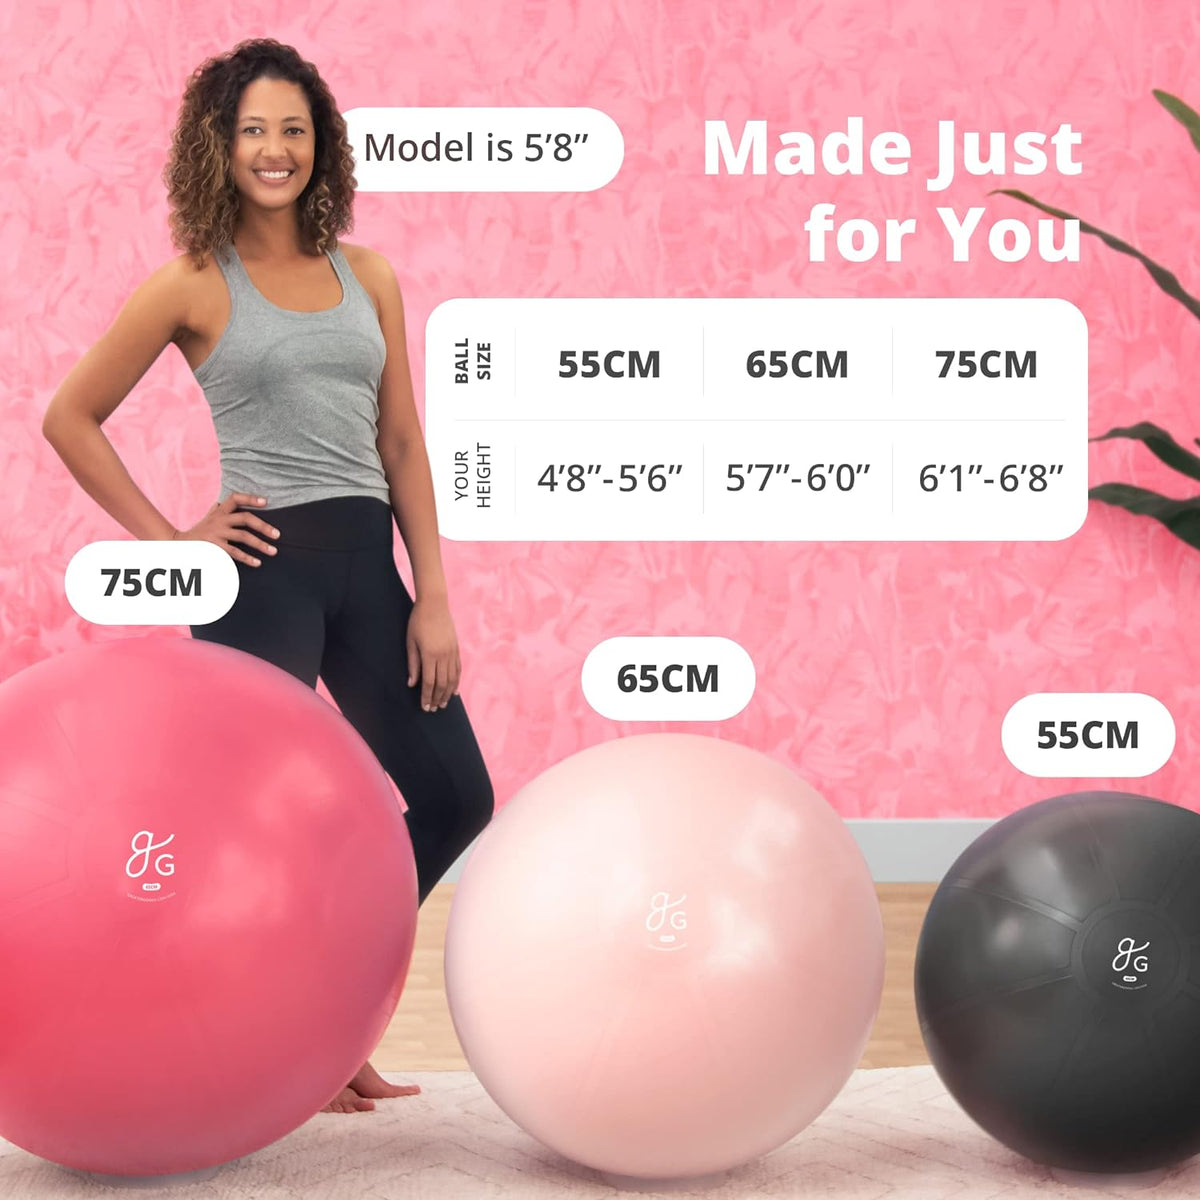 Greater Goods Exercise Ball (55cm) and Yoga Mat with Free Carrying Strap Bundle, Blush Pink